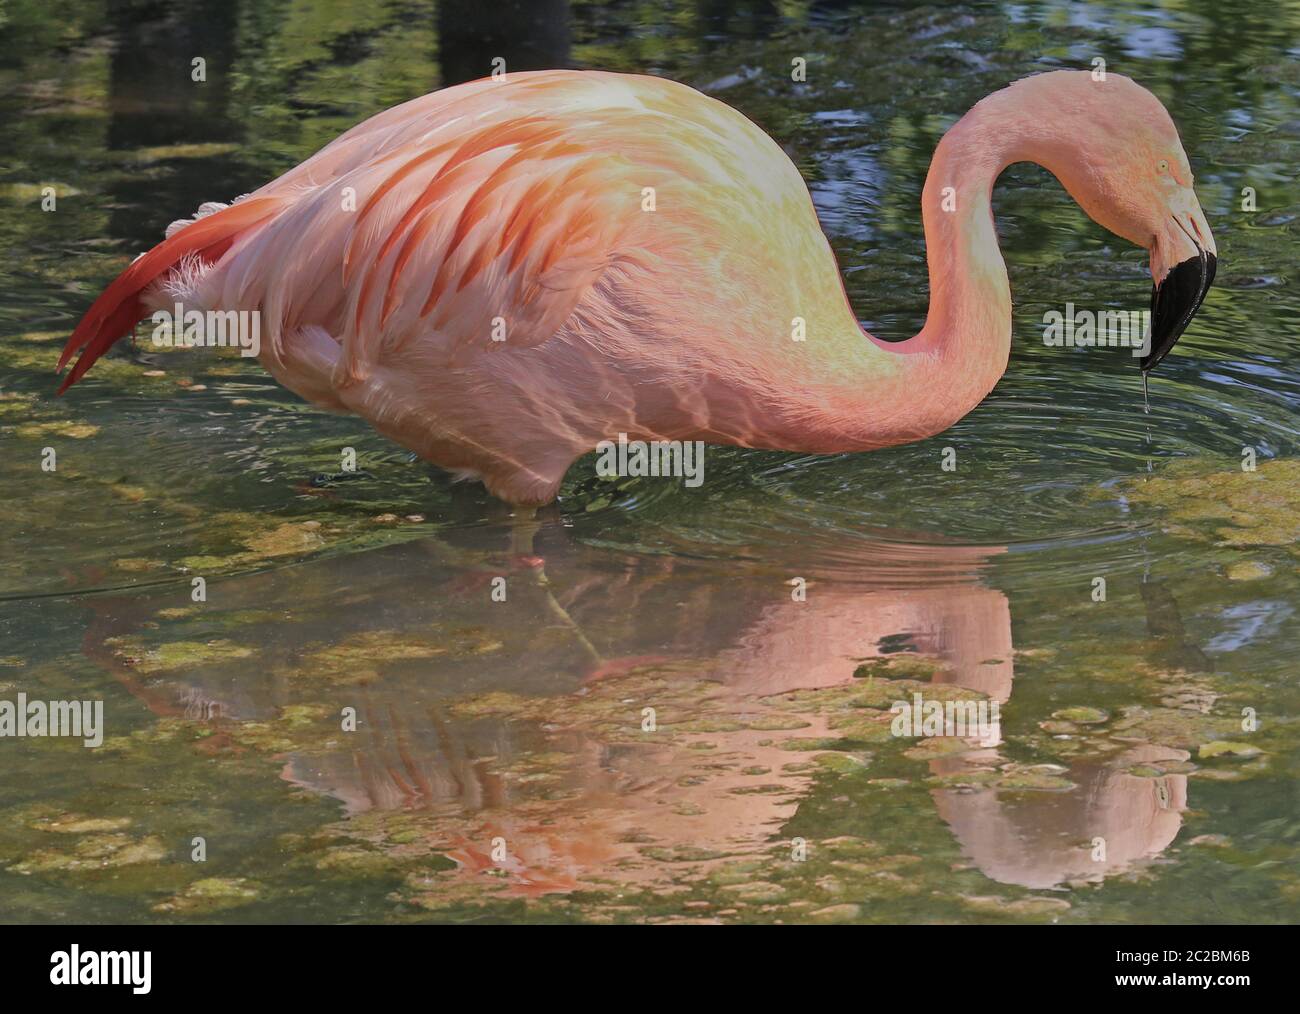 Flamingo with mirror image in the water Stock Photo